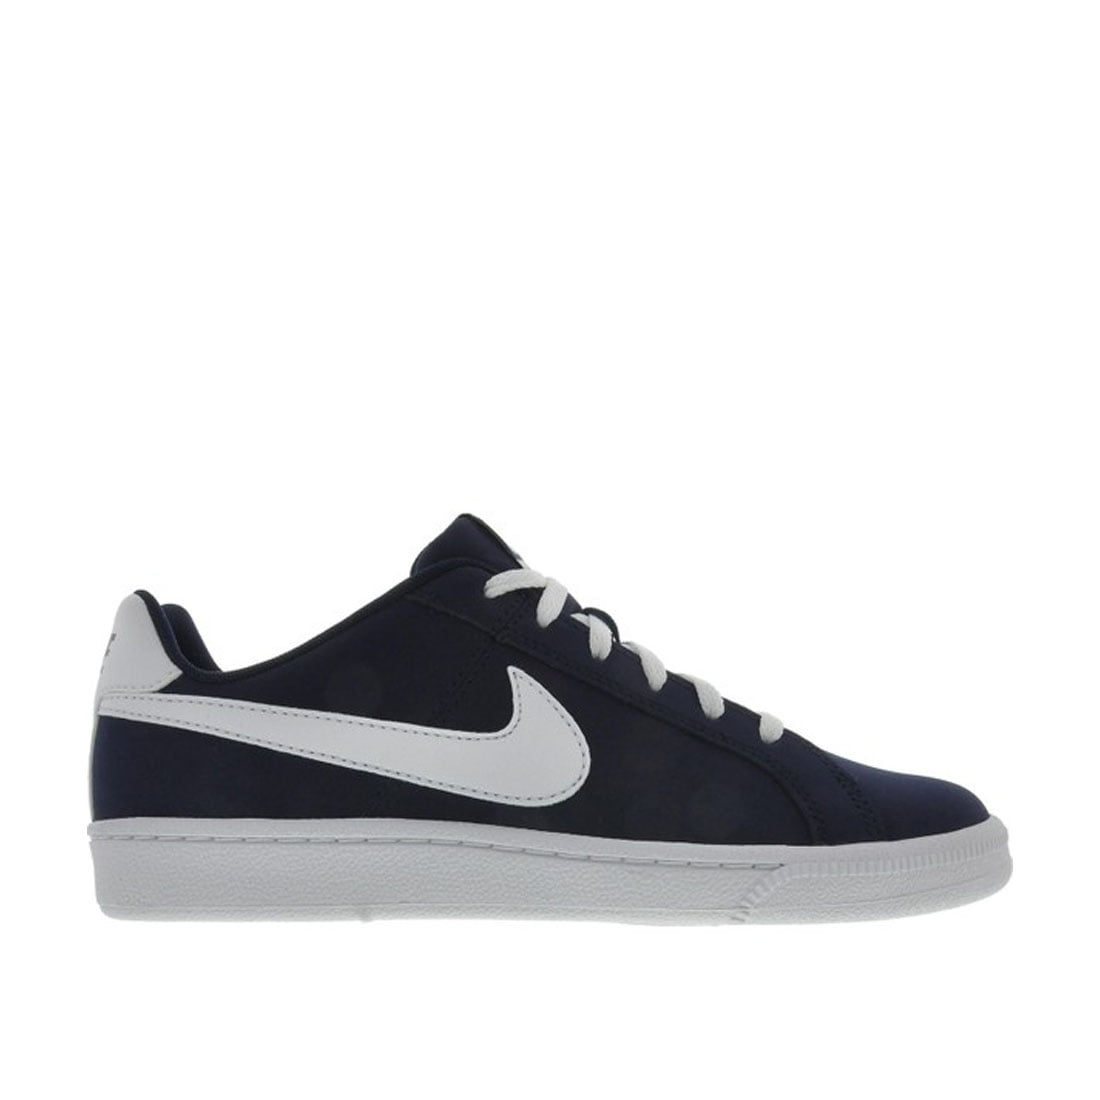 NIKE Court Royale Women/Adult 6.5 Casual 833535-400 Obsidian/White -